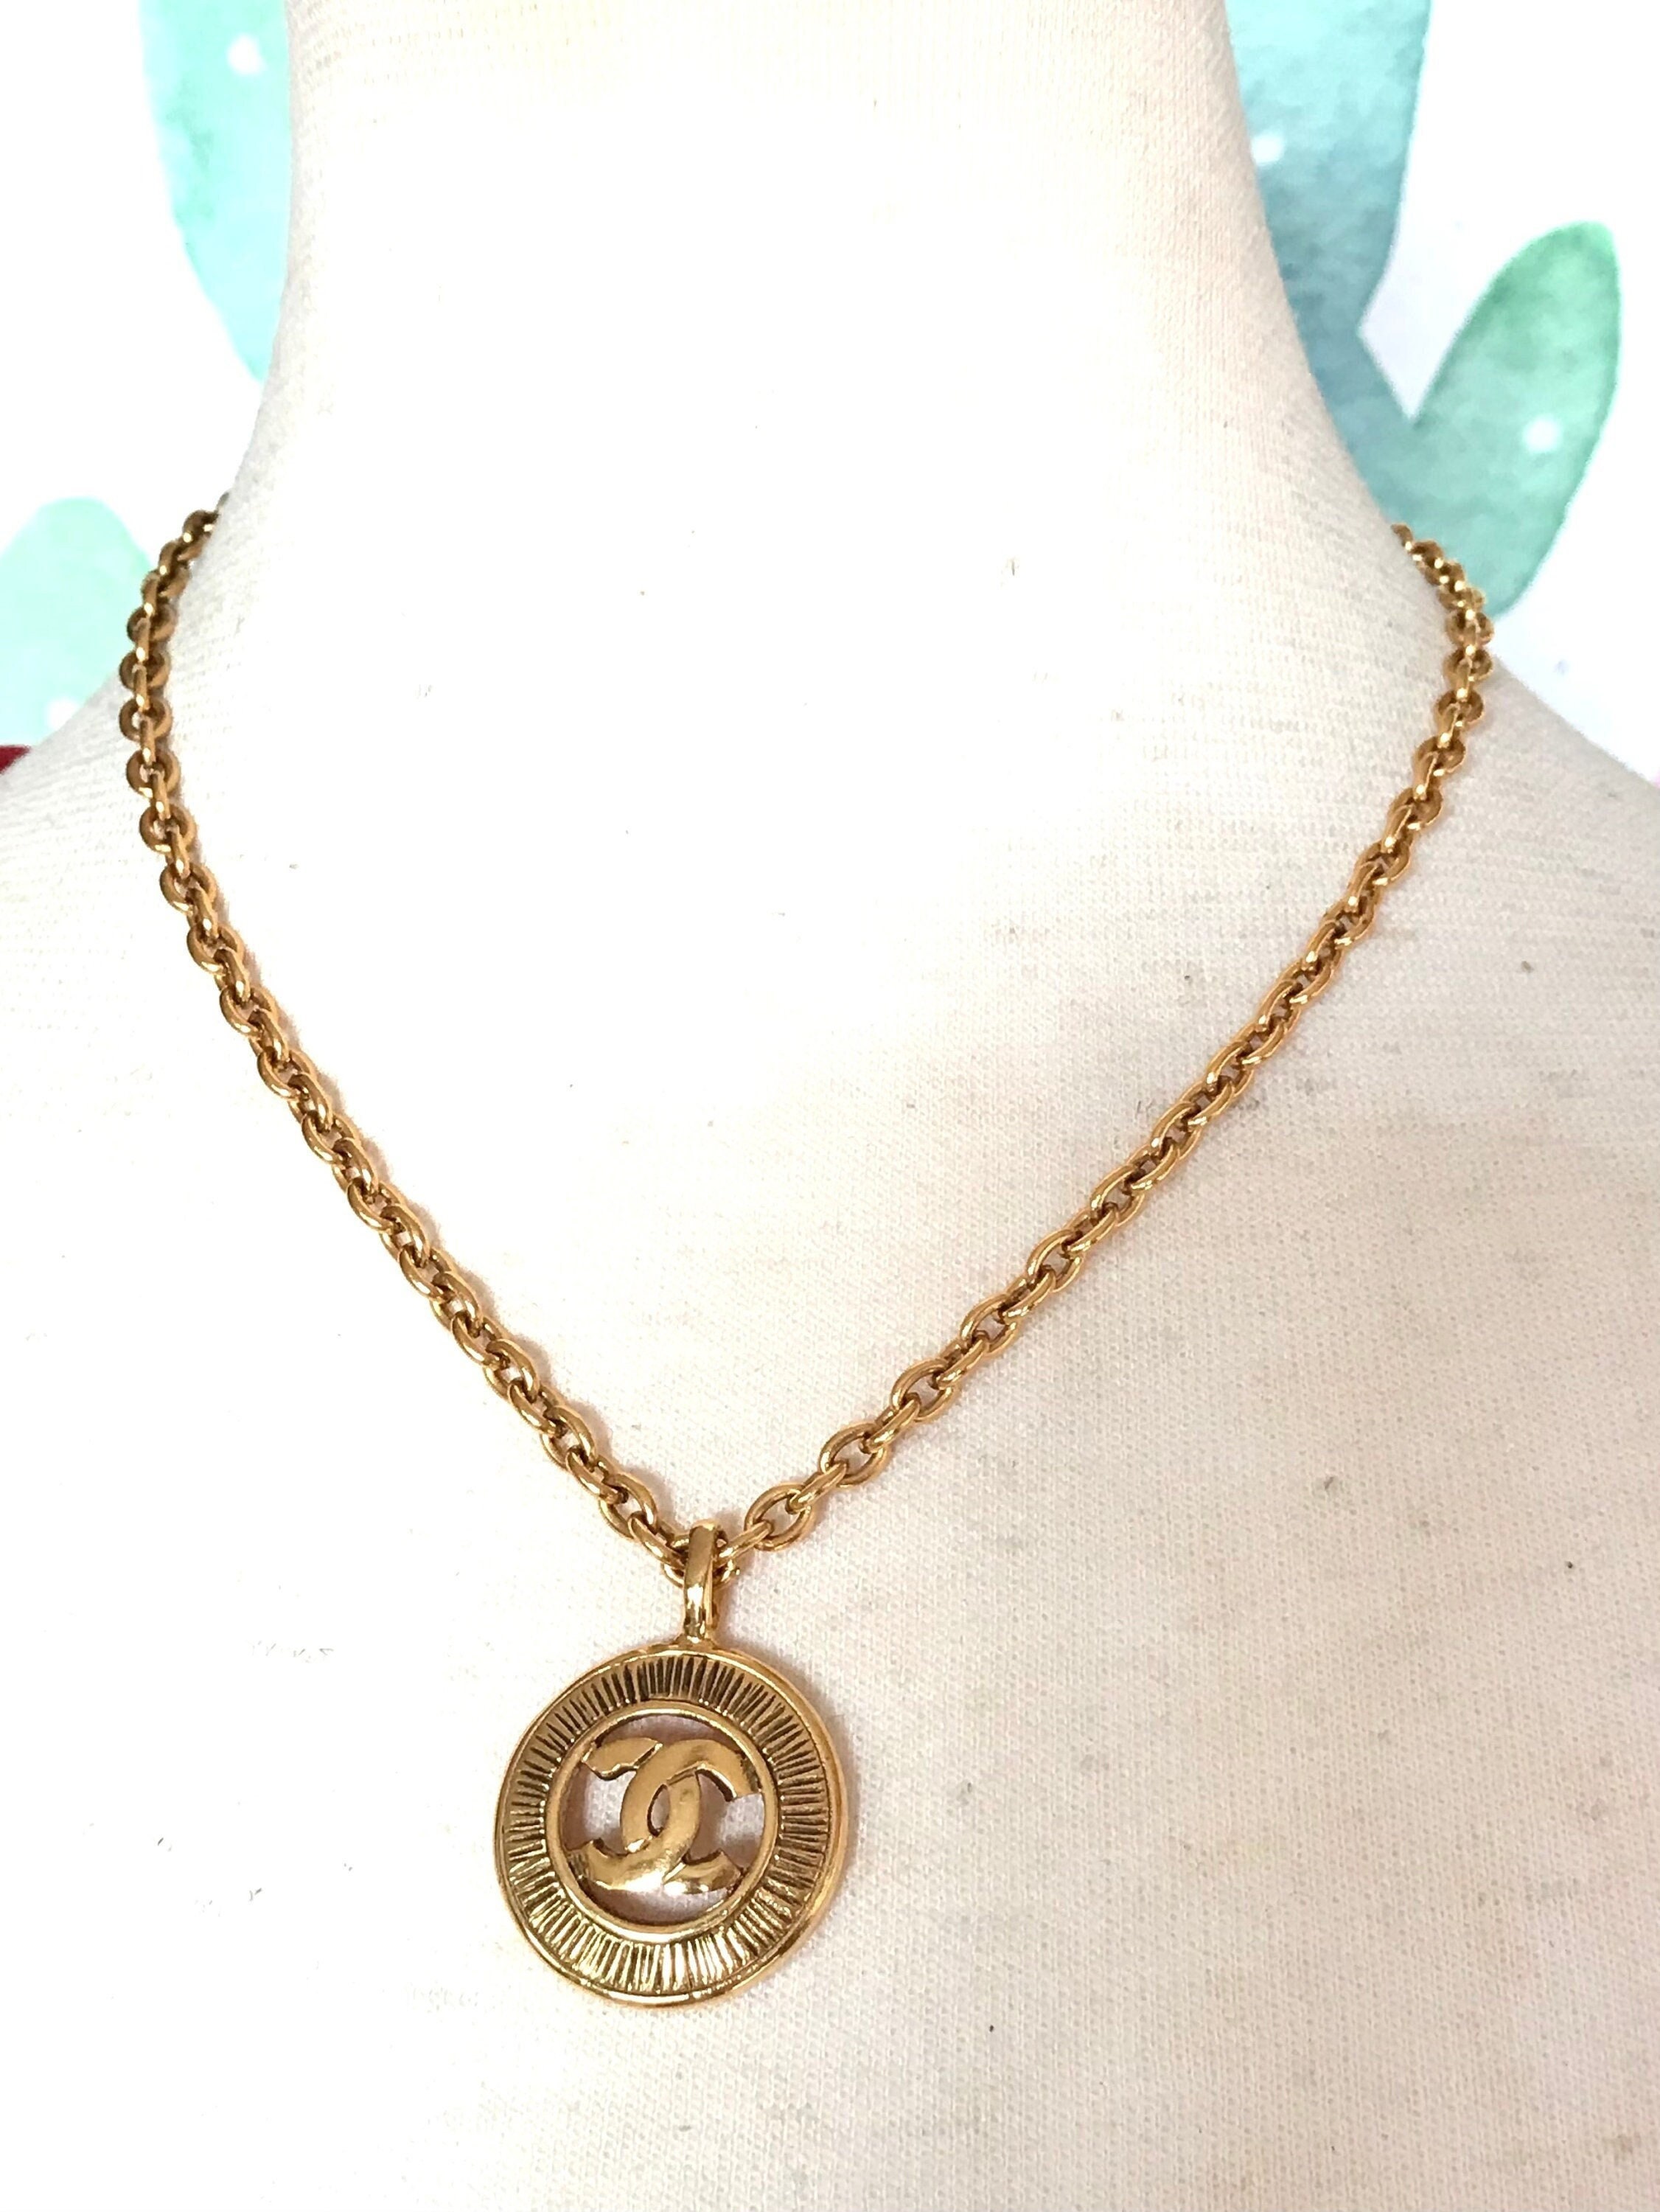 MINT. Vintage CHANEL Golden Chain Necklace With a Cutout Round 